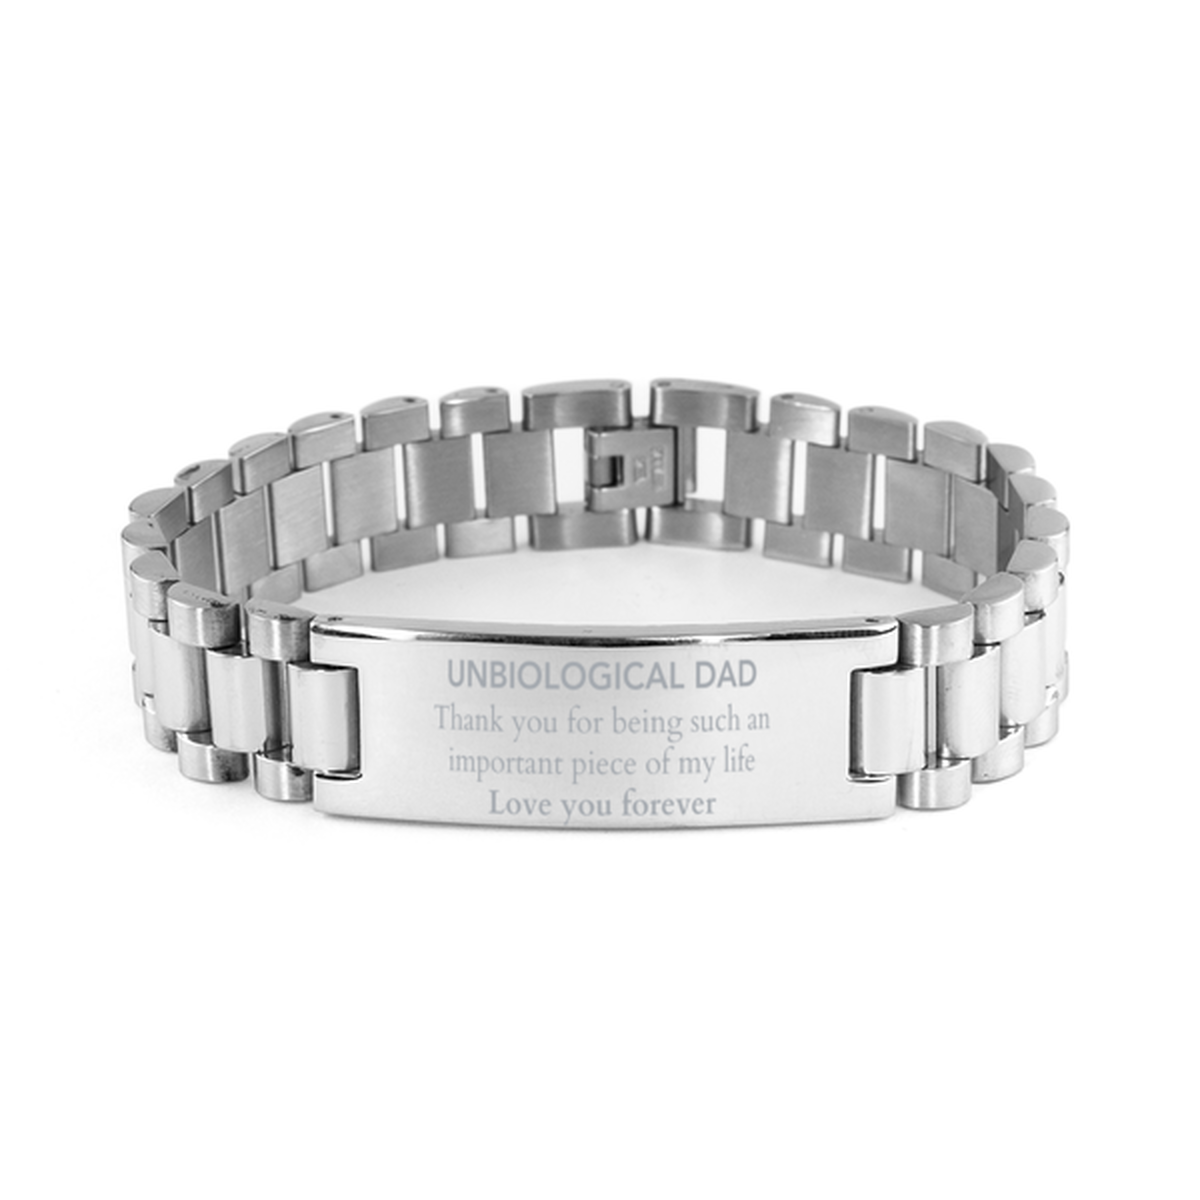 Appropriate Unbiological Dad Ladder Stainless Steel Bracelet Epic Birthday Gifts for Unbiological Dad Thank you for being such an important piece of my life Unbiological Dad Christmas Mothers Fathers Day